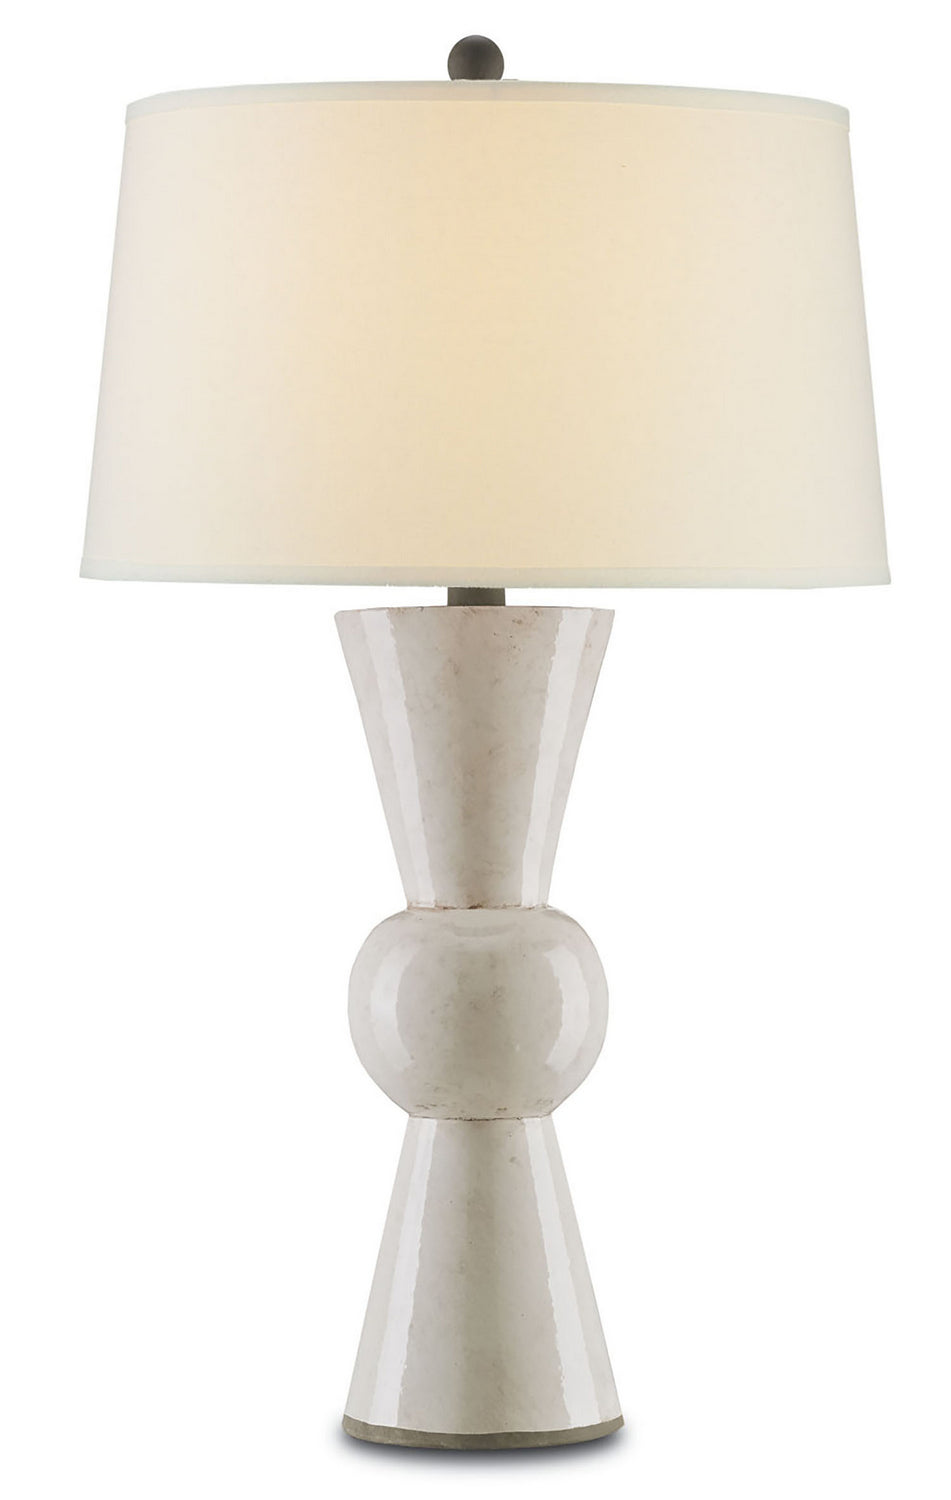 One Light Table Lamp from the Upbeat collection in Antique White finish